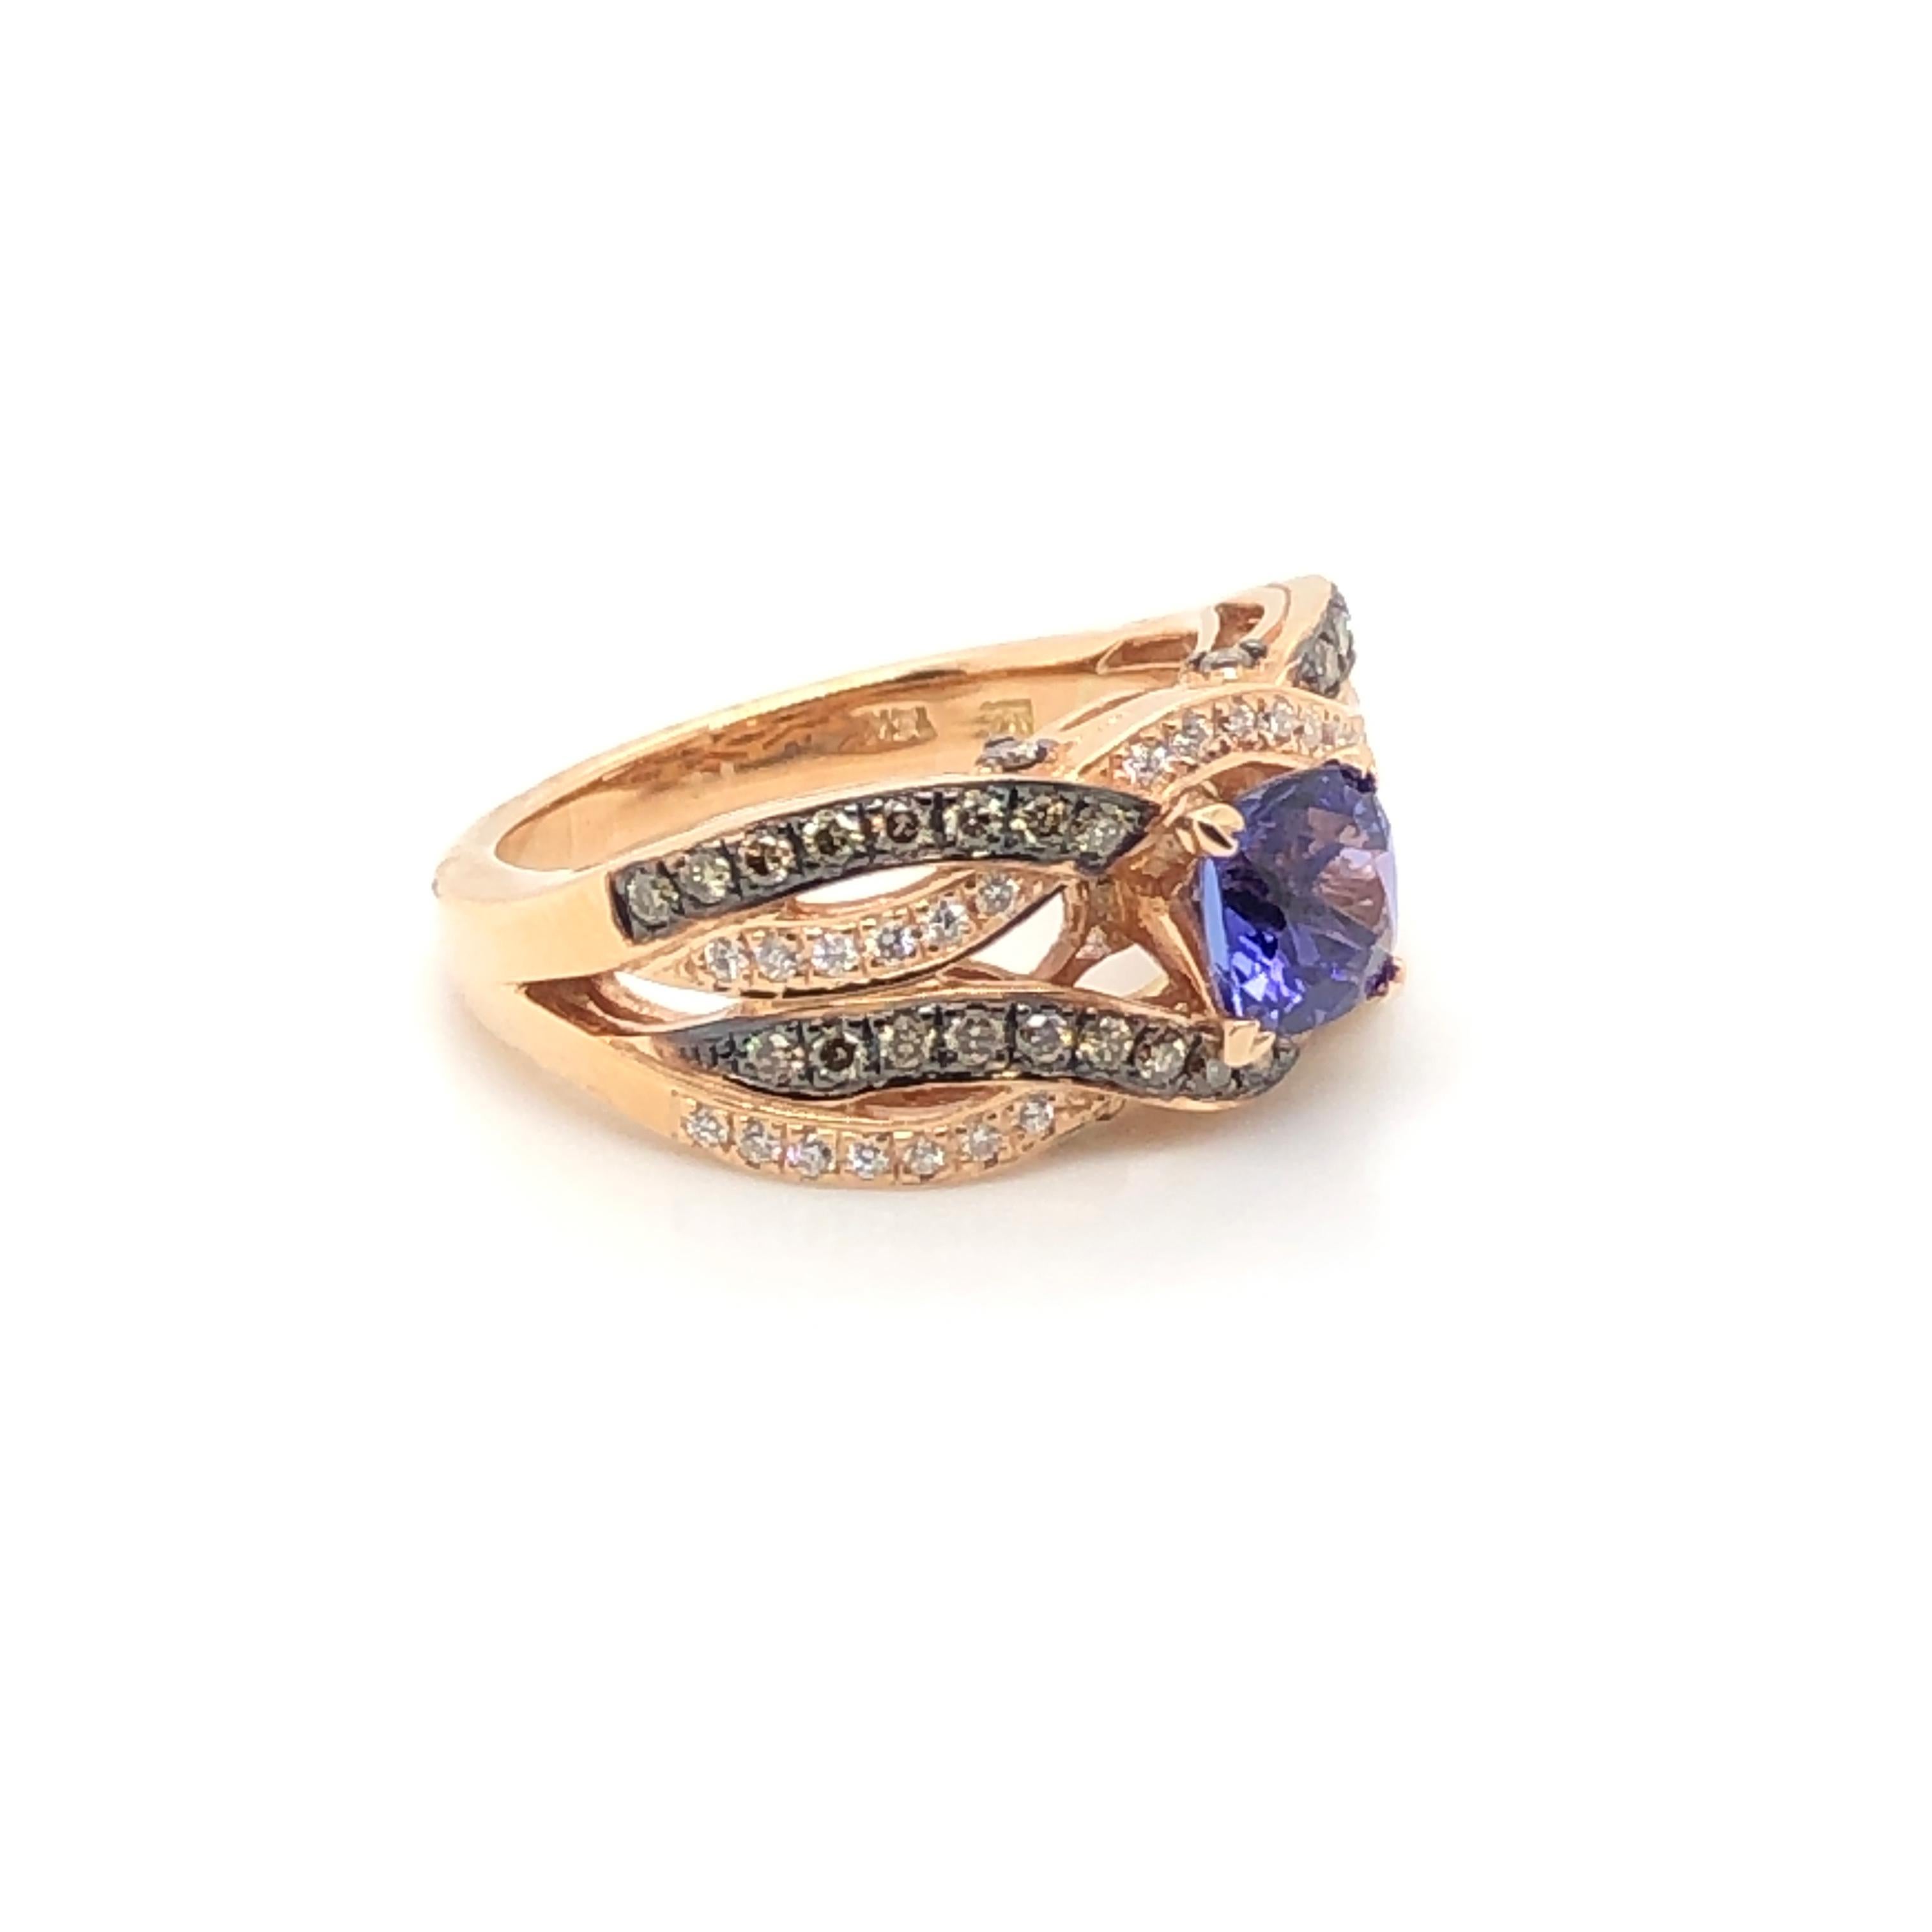 This Le Vian Bridal ring is the prefect choice for the bride who loves blue gems.  Centering this 14k rose gold ring is a beautiful 1-1/8 carat cushion cut Tanzanite that appears to rest atop a Gladiator style band with intertwining straps of